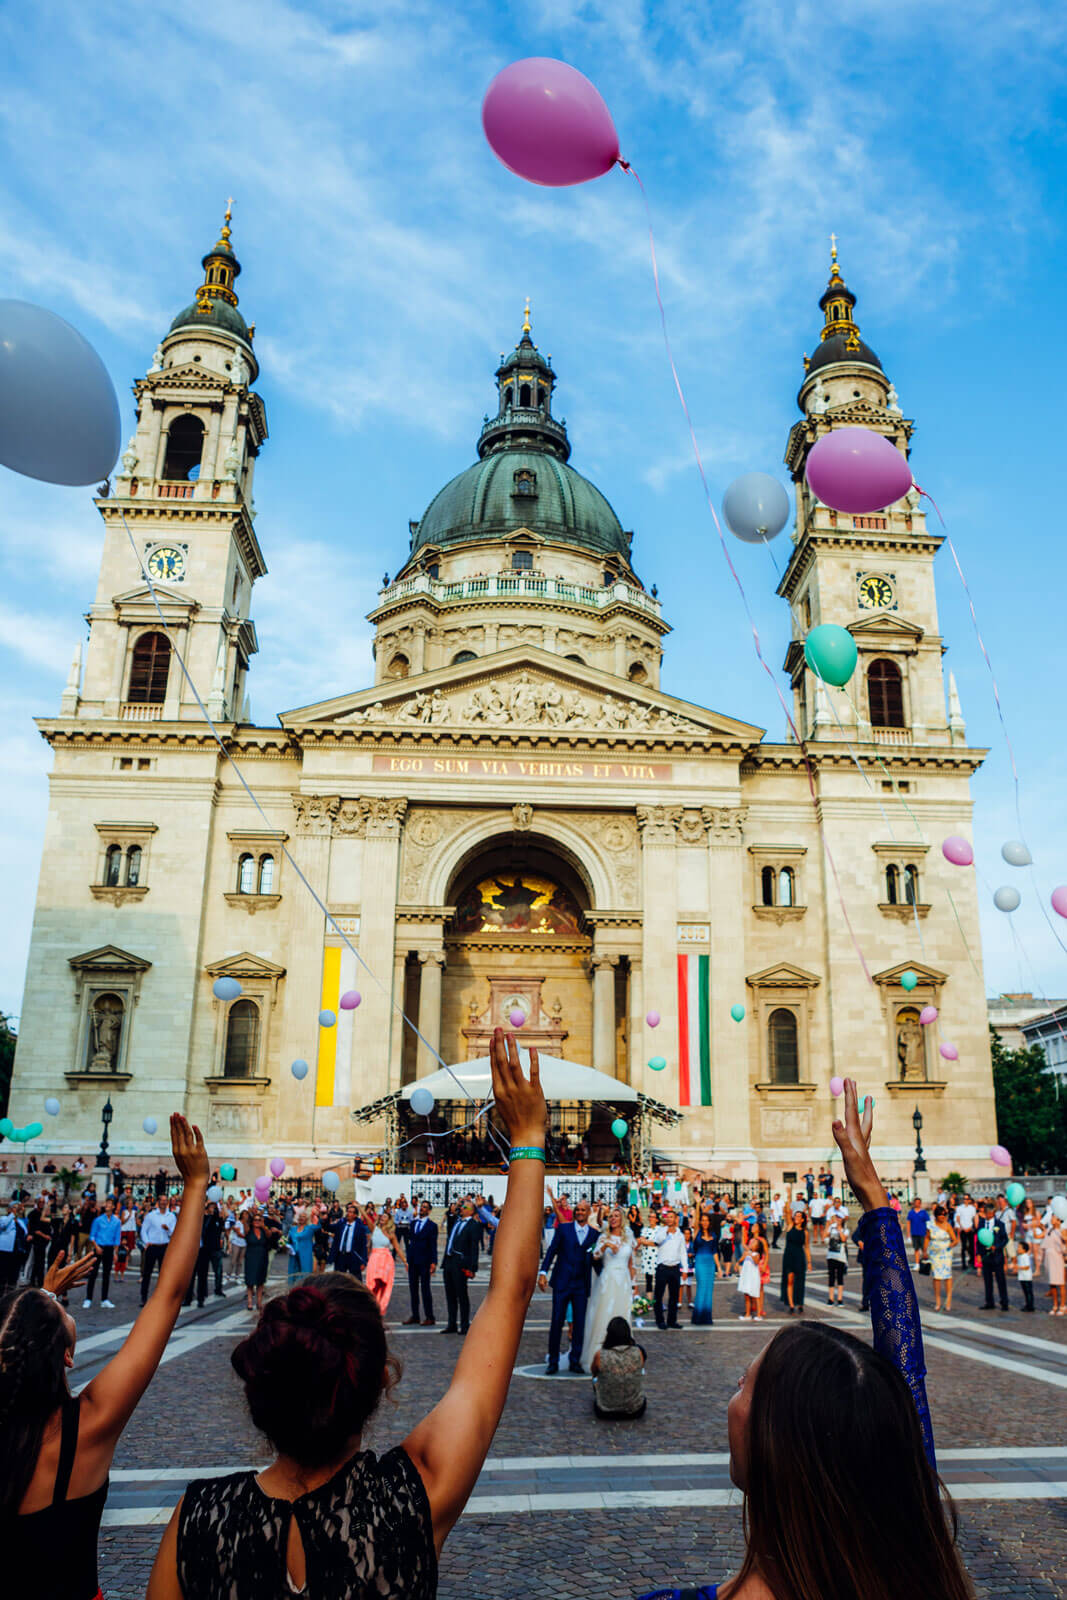 Wedding and balloons being released outside st stephens basilica